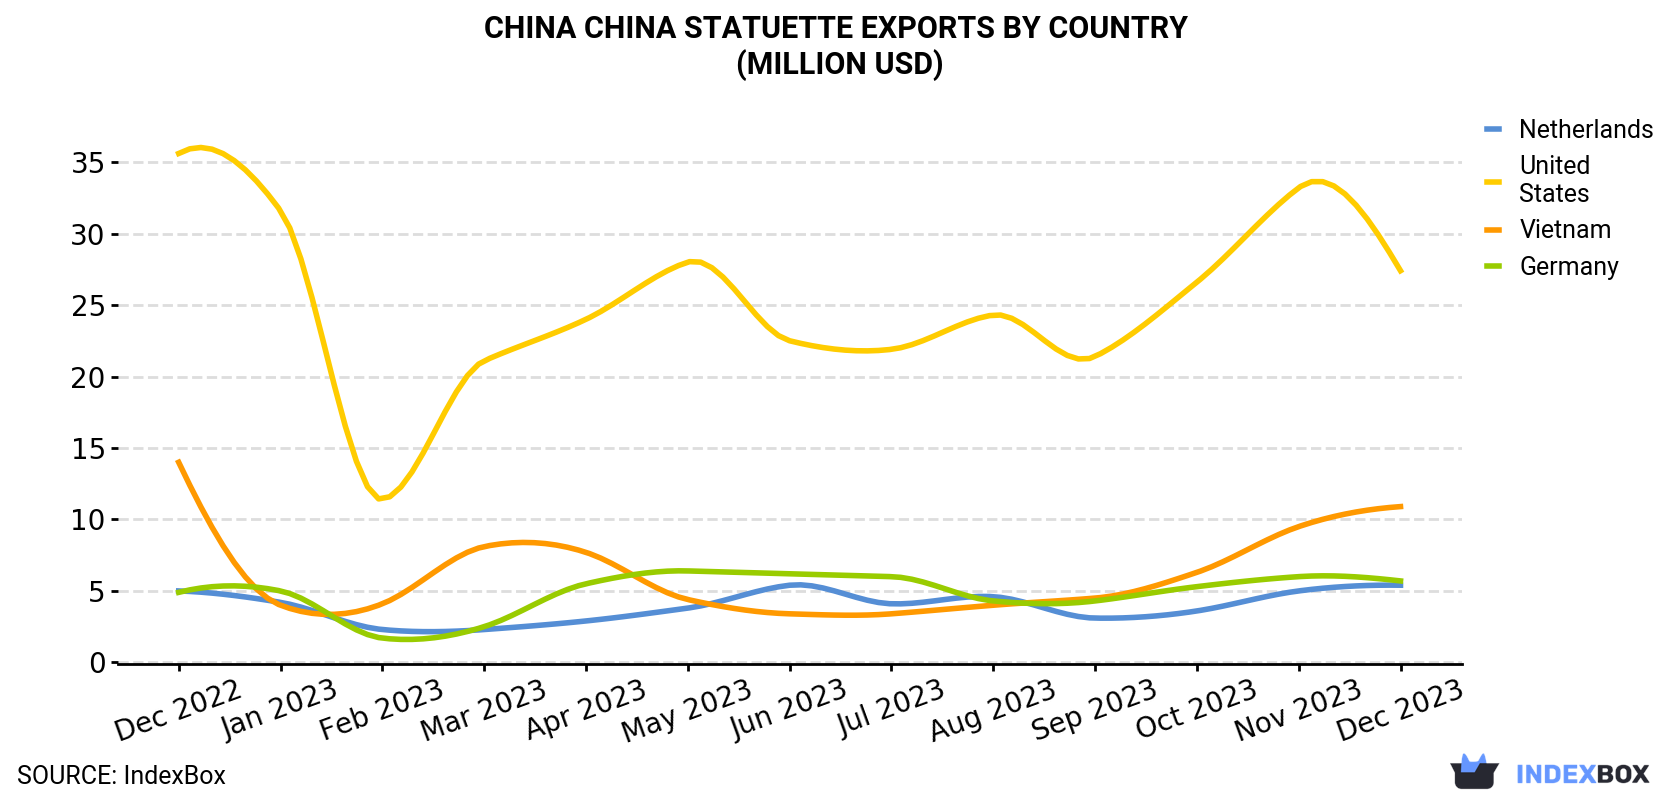 China China Statuette Exports By Country (Million USD)